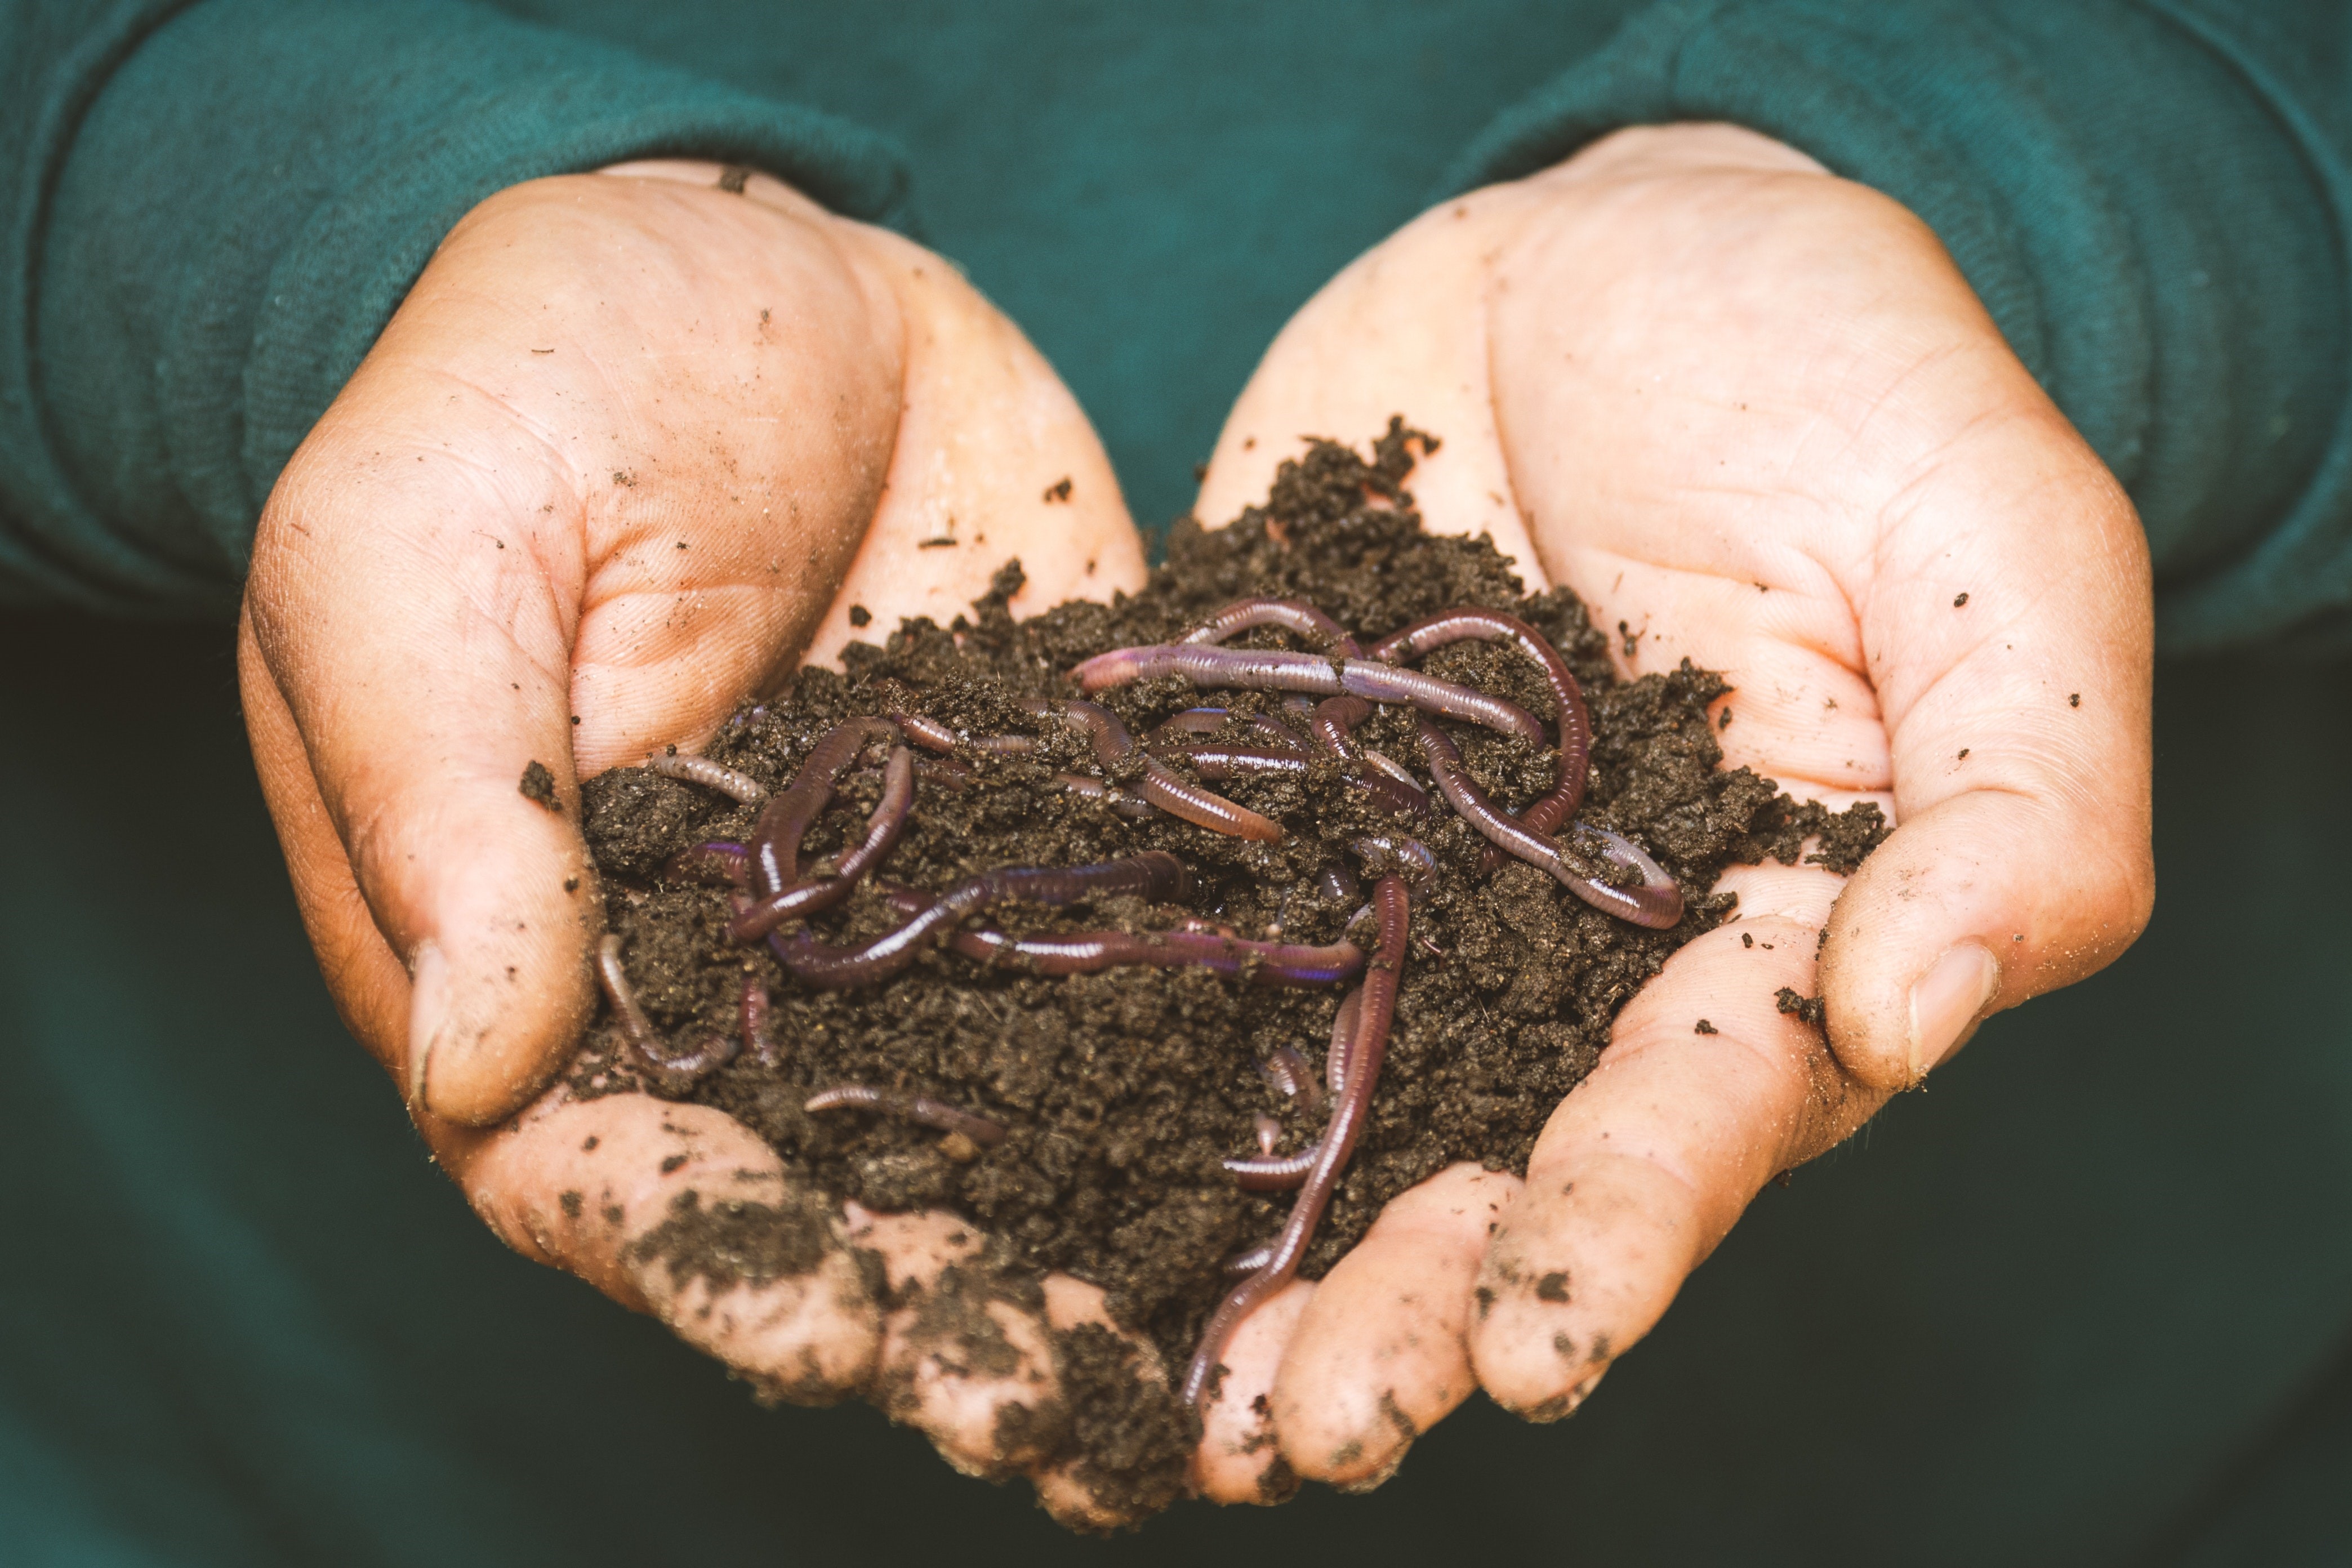 Waste soil and worms 